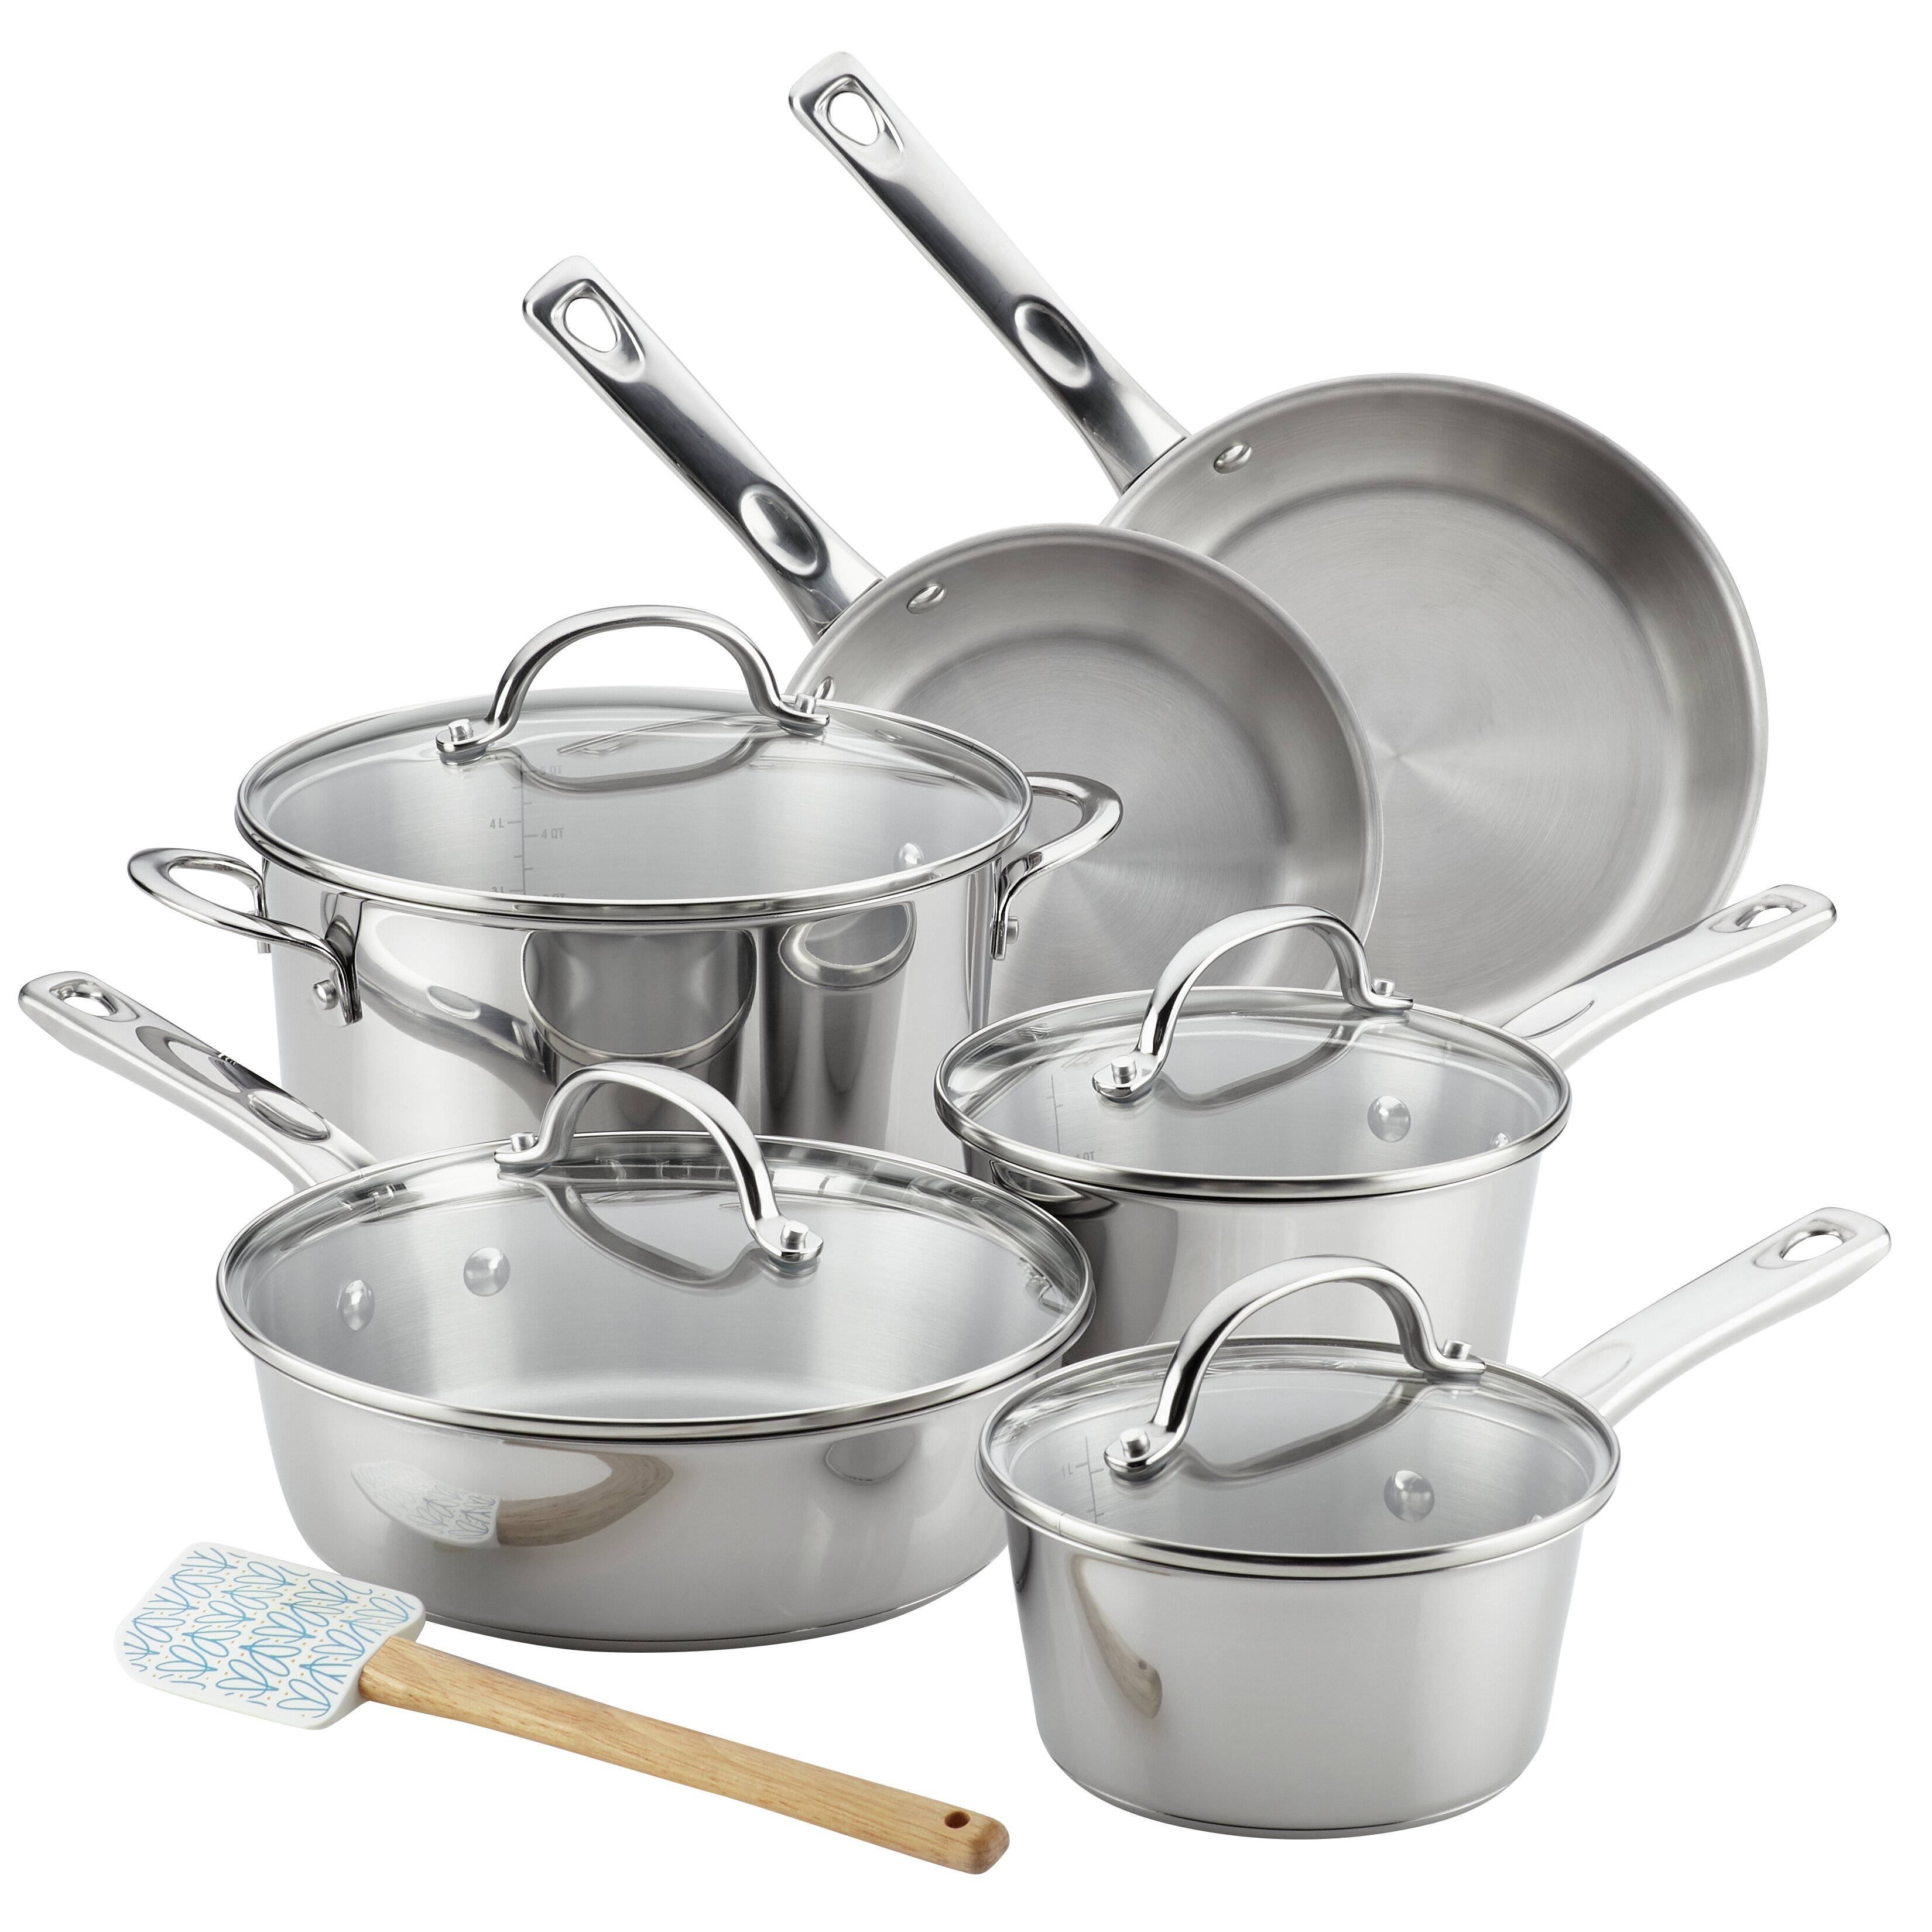 Momostar induction pots and pans, stainless steel pots and pans set